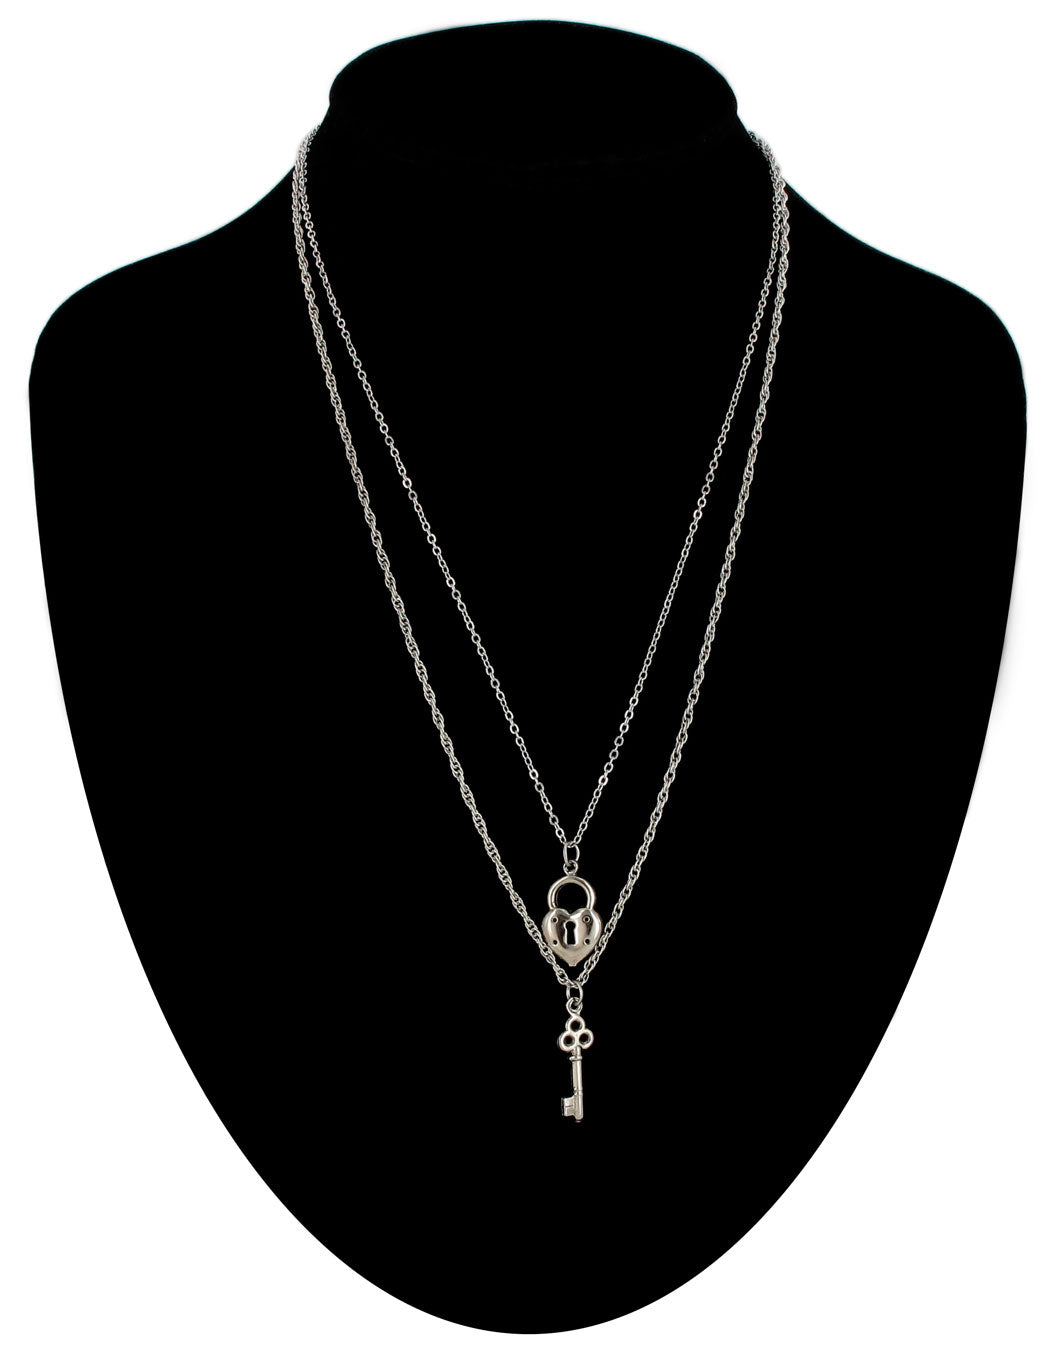 Ky & Co Made in USA Heart Key Pendant Necklace 2 Piece Set 18" - Silver Tone